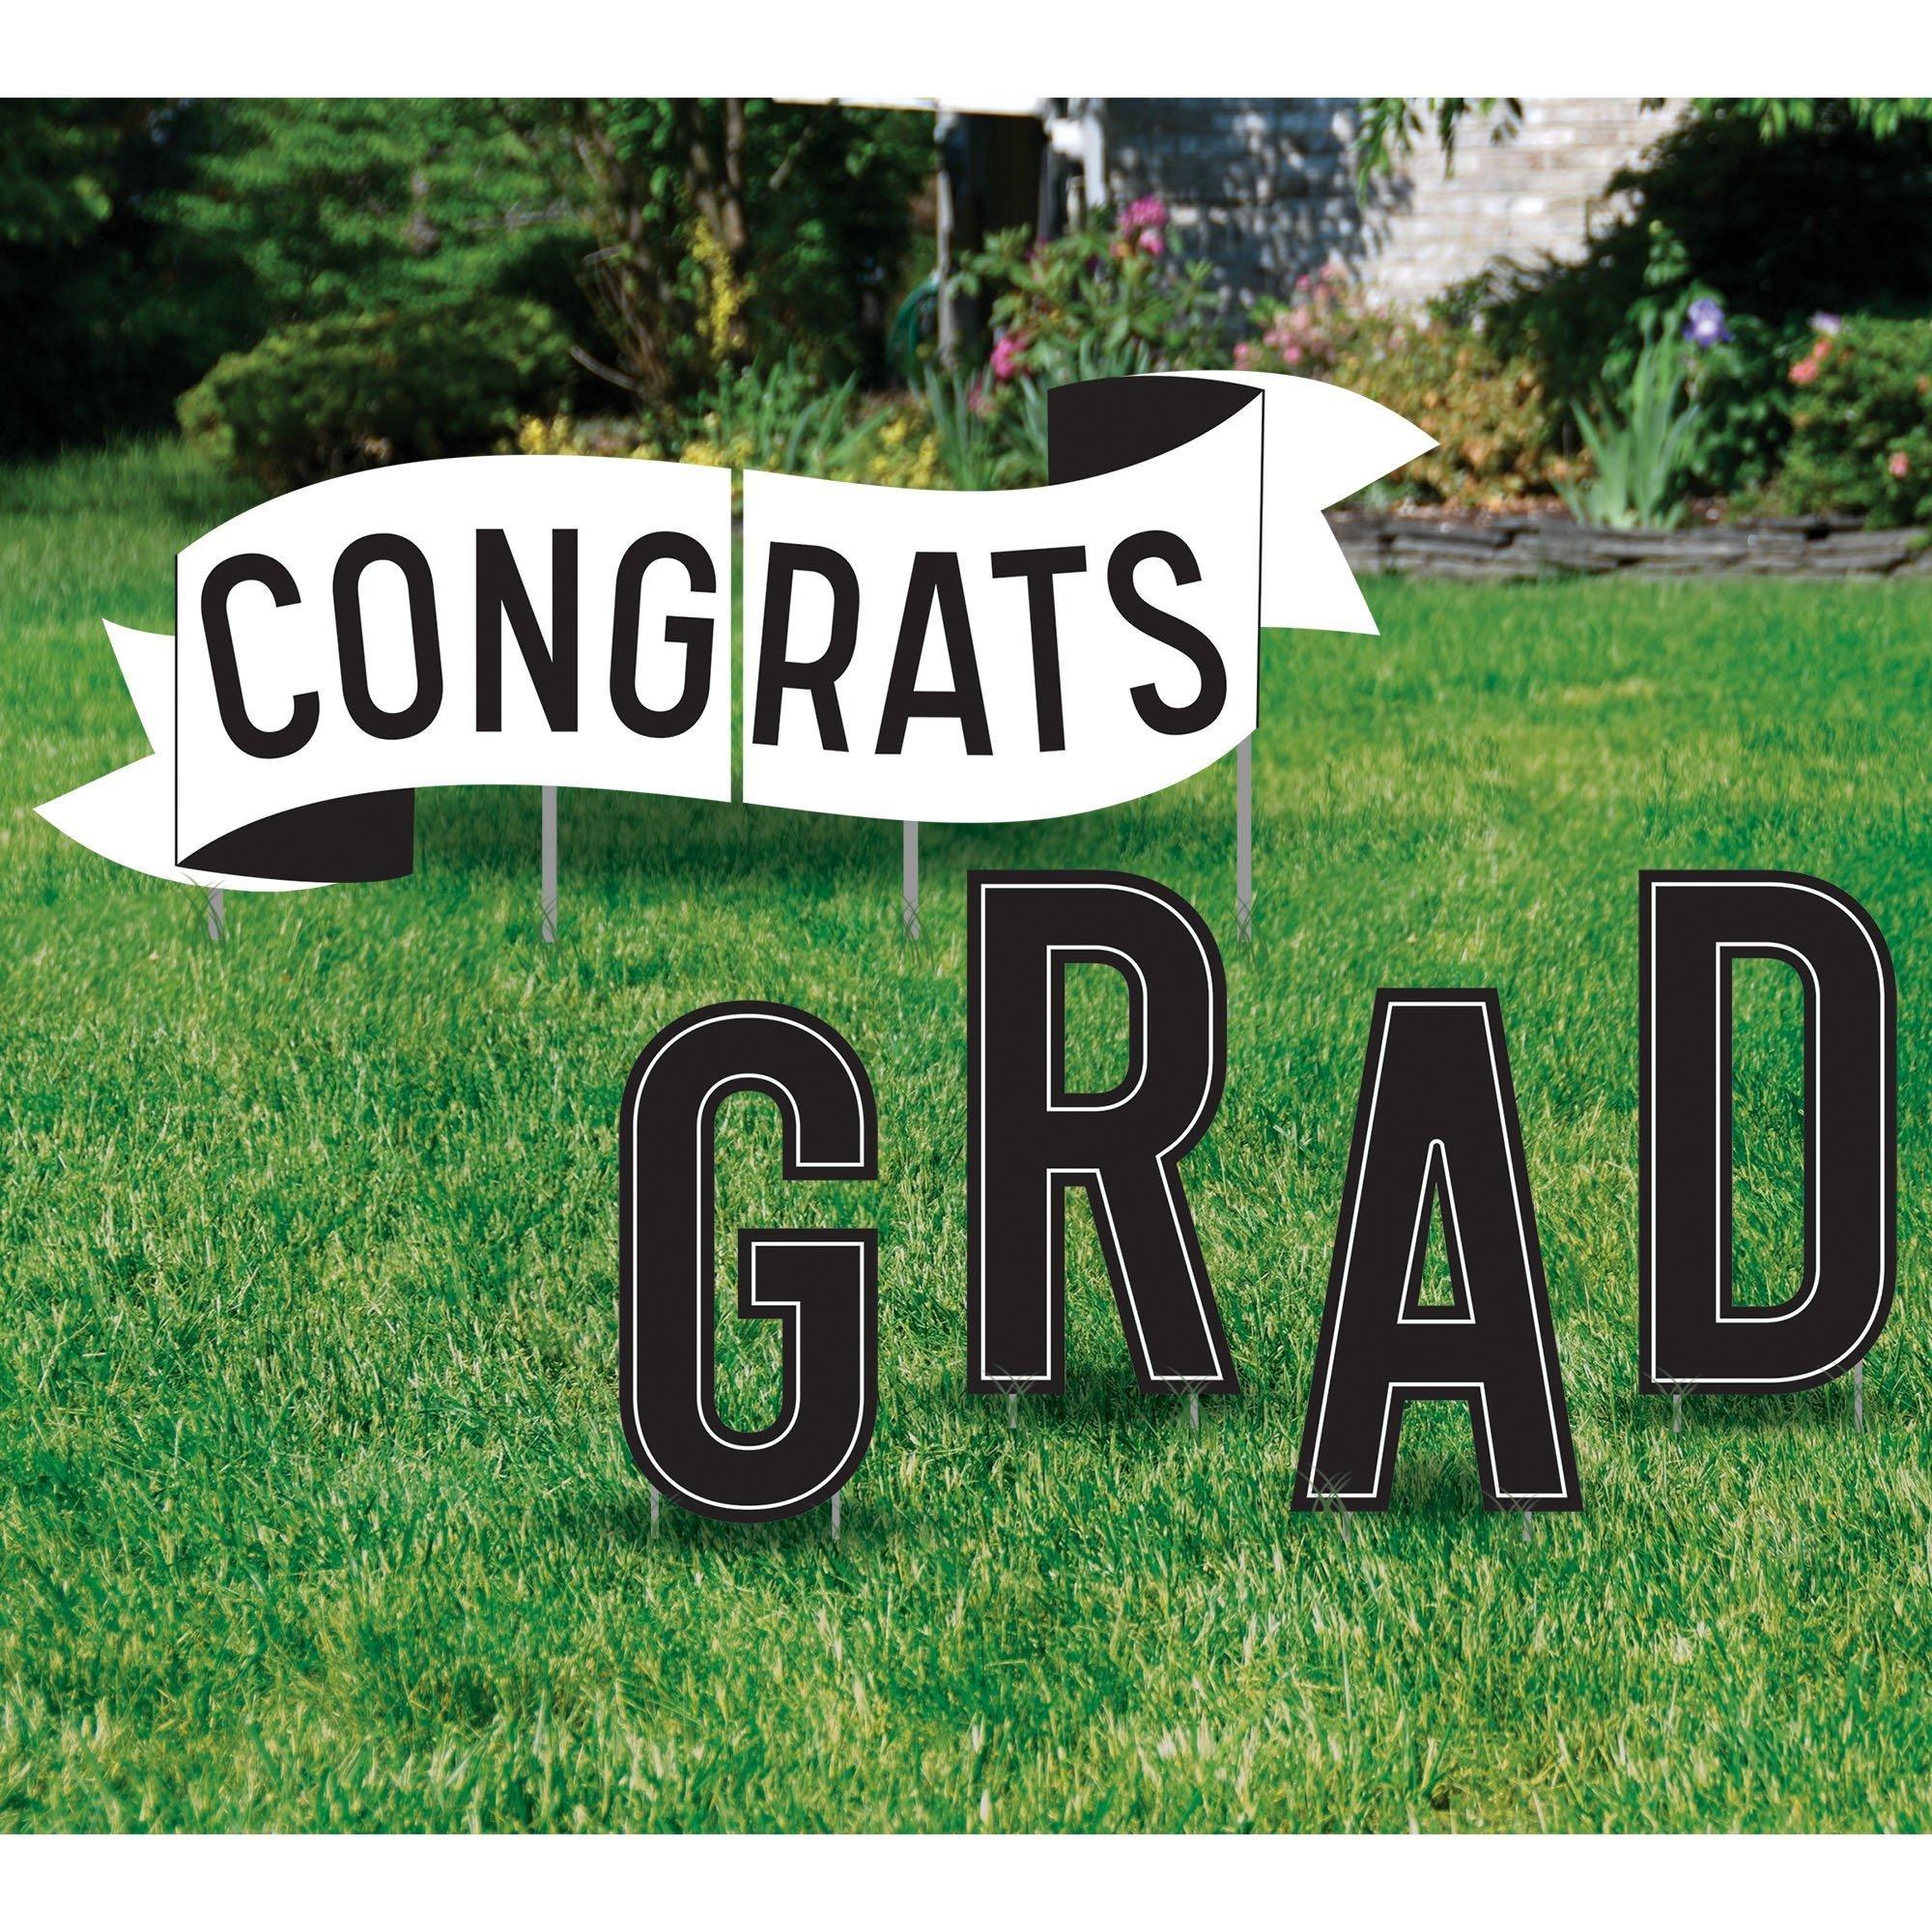 Graduation Party Outdoor Decorations Kit with Banners, Balloons, Yard Signs - Light Blue 2024 Congrats Grad